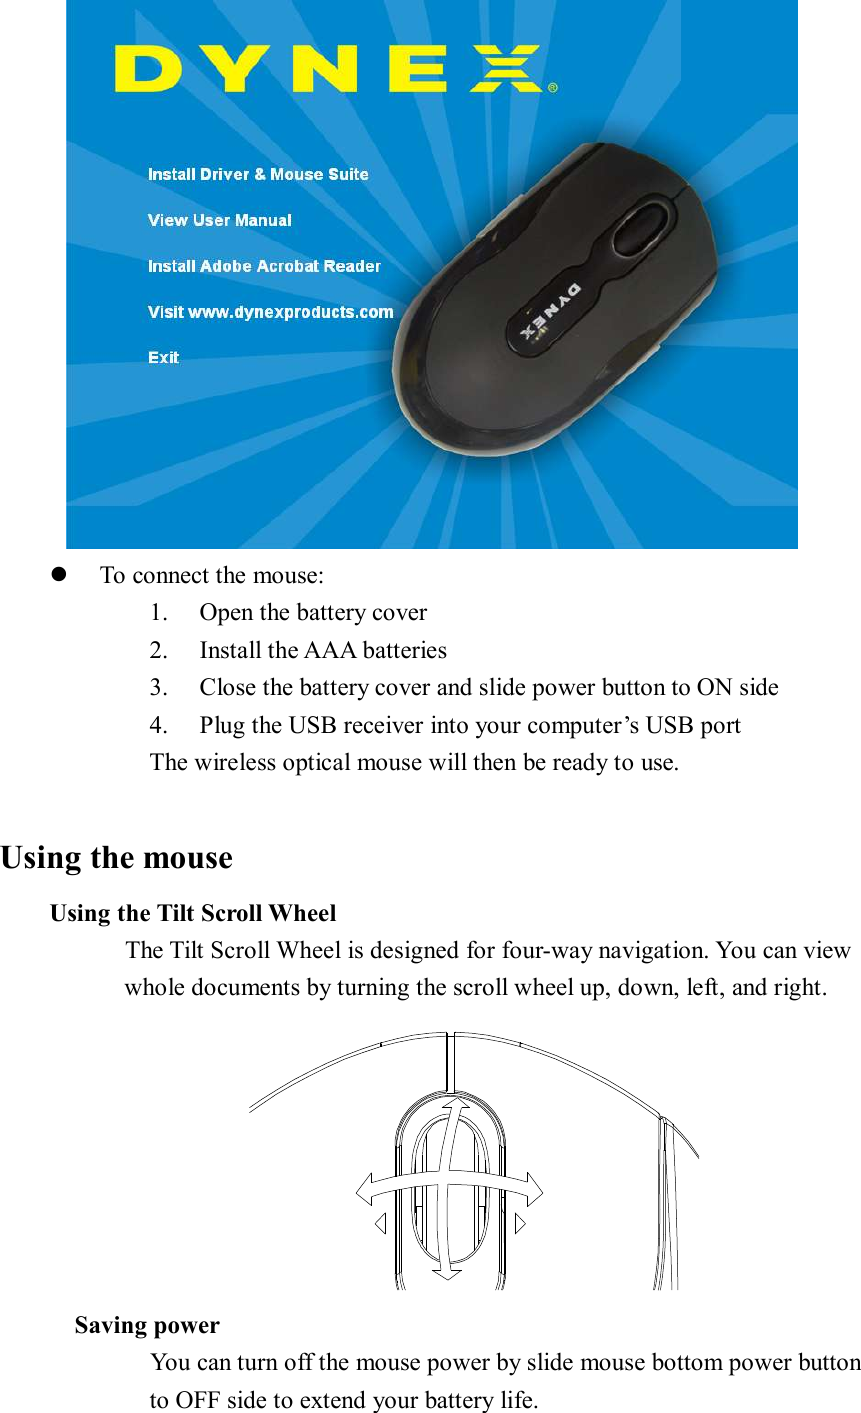  l To connect the mouse: 1. Open the battery cover 2. Install the AAA batteries 3. Close the battery cover and slide power button to ON side 4. Plug the USB receiver into your computer’s USB port The wireless optical mouse will then be ready to use.  Using the mouse     Using the Tilt Scroll Wheel           The Tilt Scroll Wheel is designed for four-way navigation. You can view whole documents by turning the scroll wheel up, down, left, and right.  Saving power       You can turn off the mouse power by slide mouse bottom power button  to OFF side to extend your battery life. 